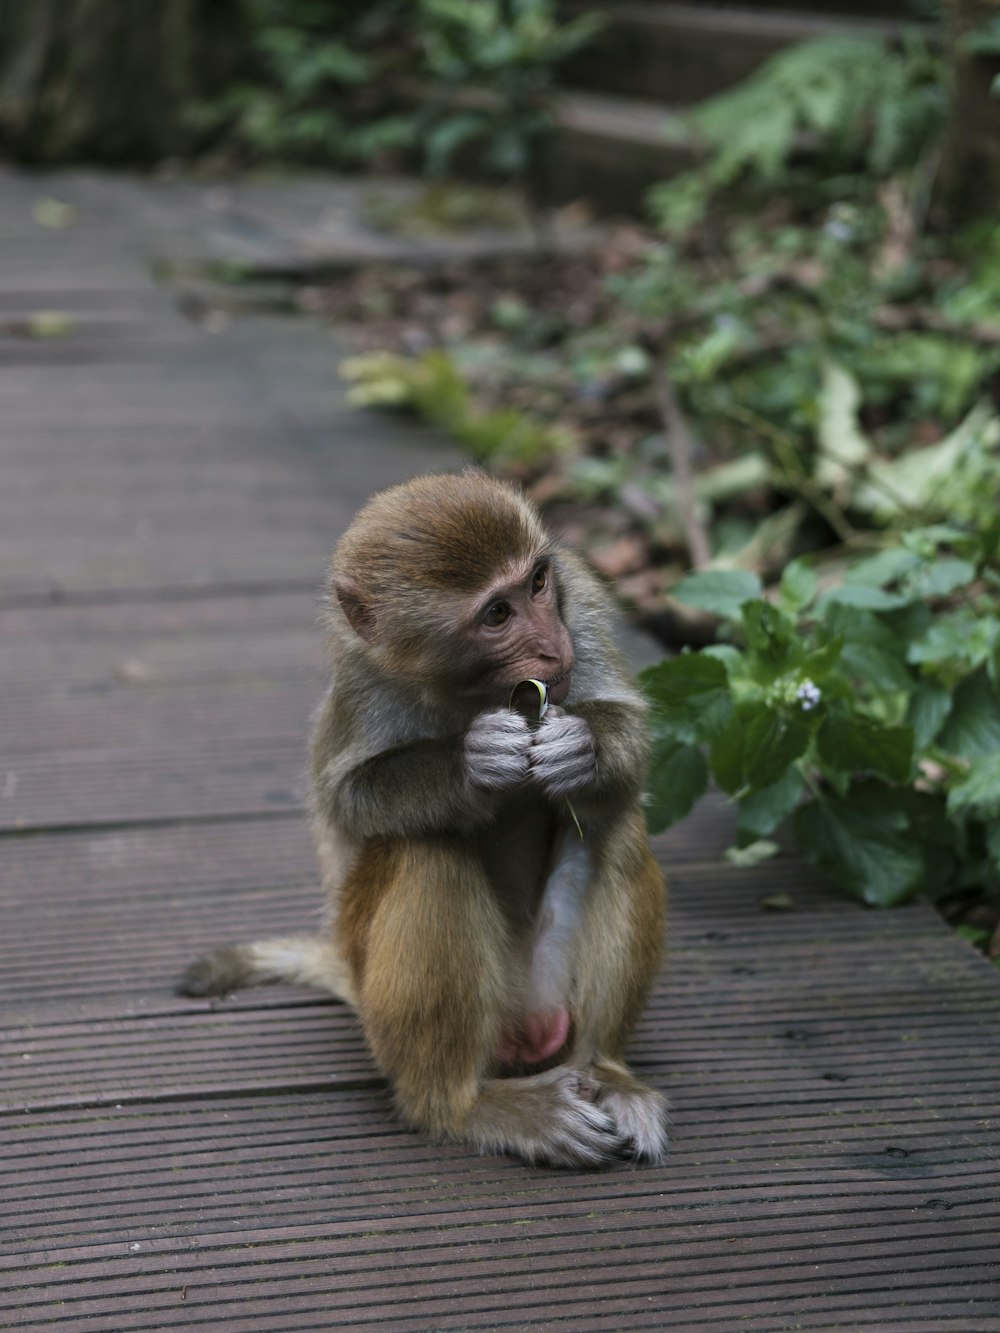 a monkey sitting on a wooden walkway eating something